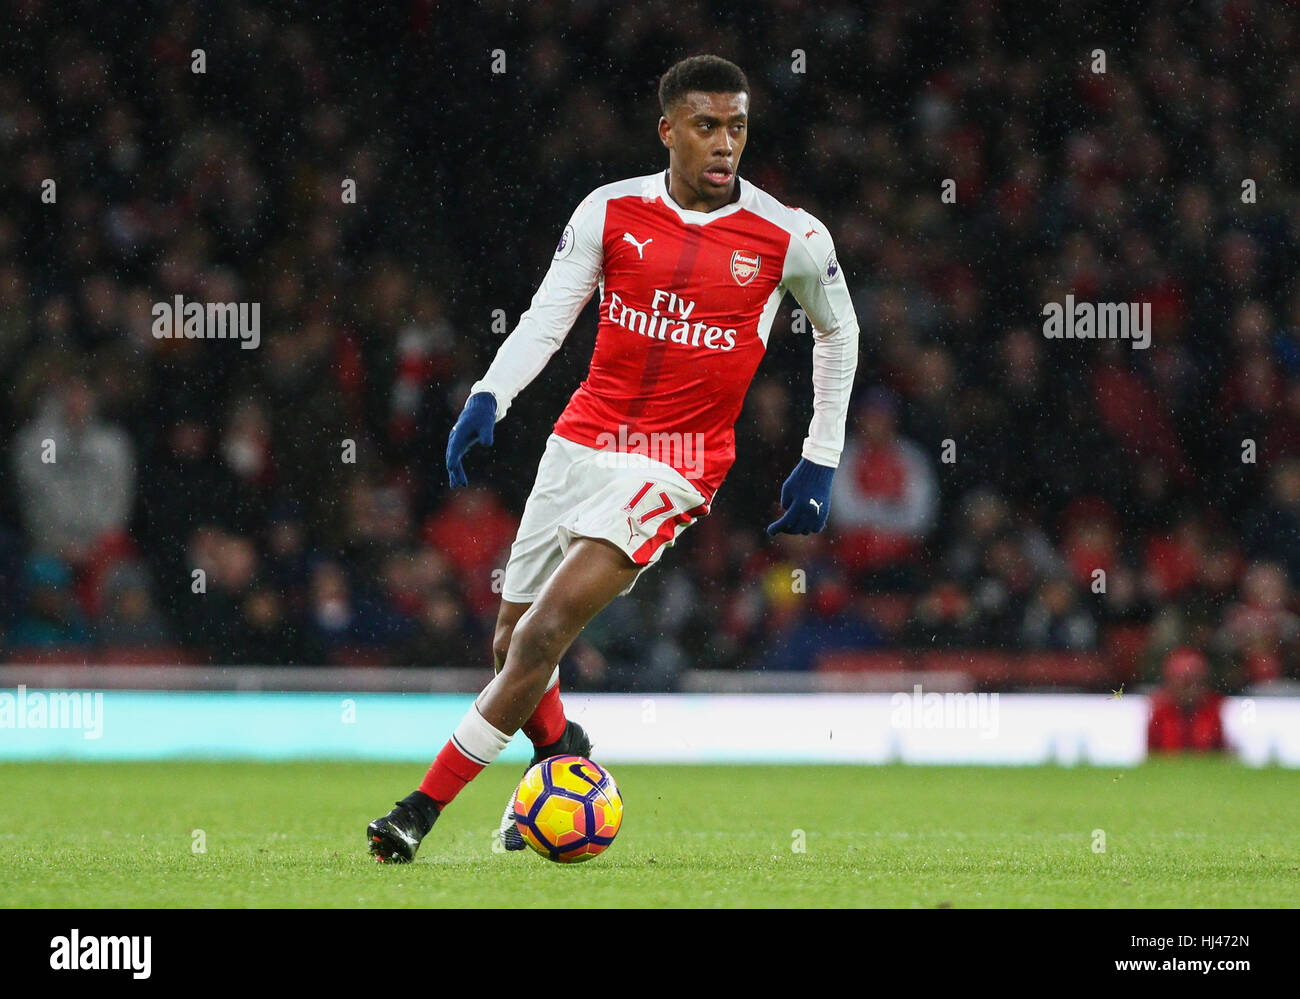 Alex Iwobi of Arsenal during the Premier League match between Arsenal and Crystal Palace at the Emirates Stadium in London. December 1, 2017. Stock Photo